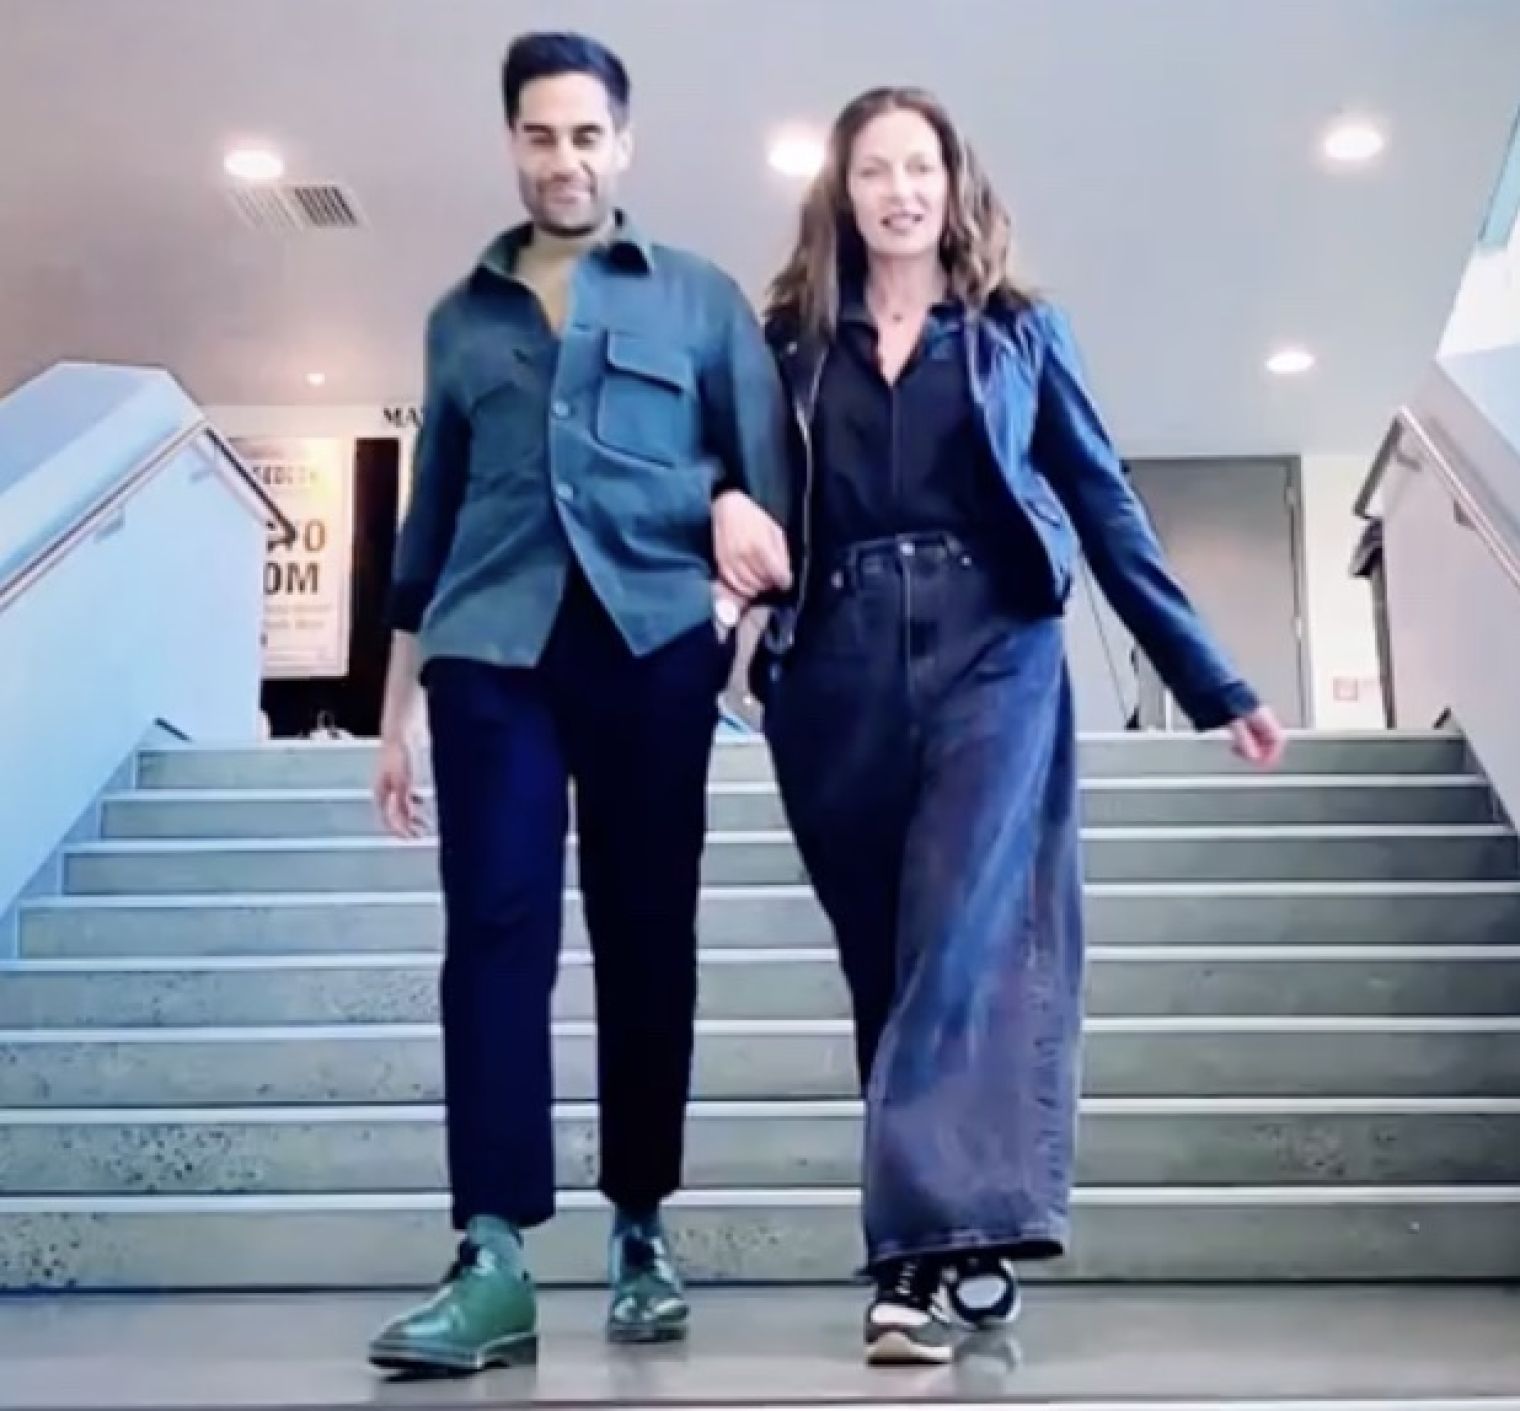 Doctor Who's 'The Master', Sacha Dhawan, has revealed a video of him united with another of Doctor Who's nemeses the 'Mistress' (AKA Michelle Gomez)